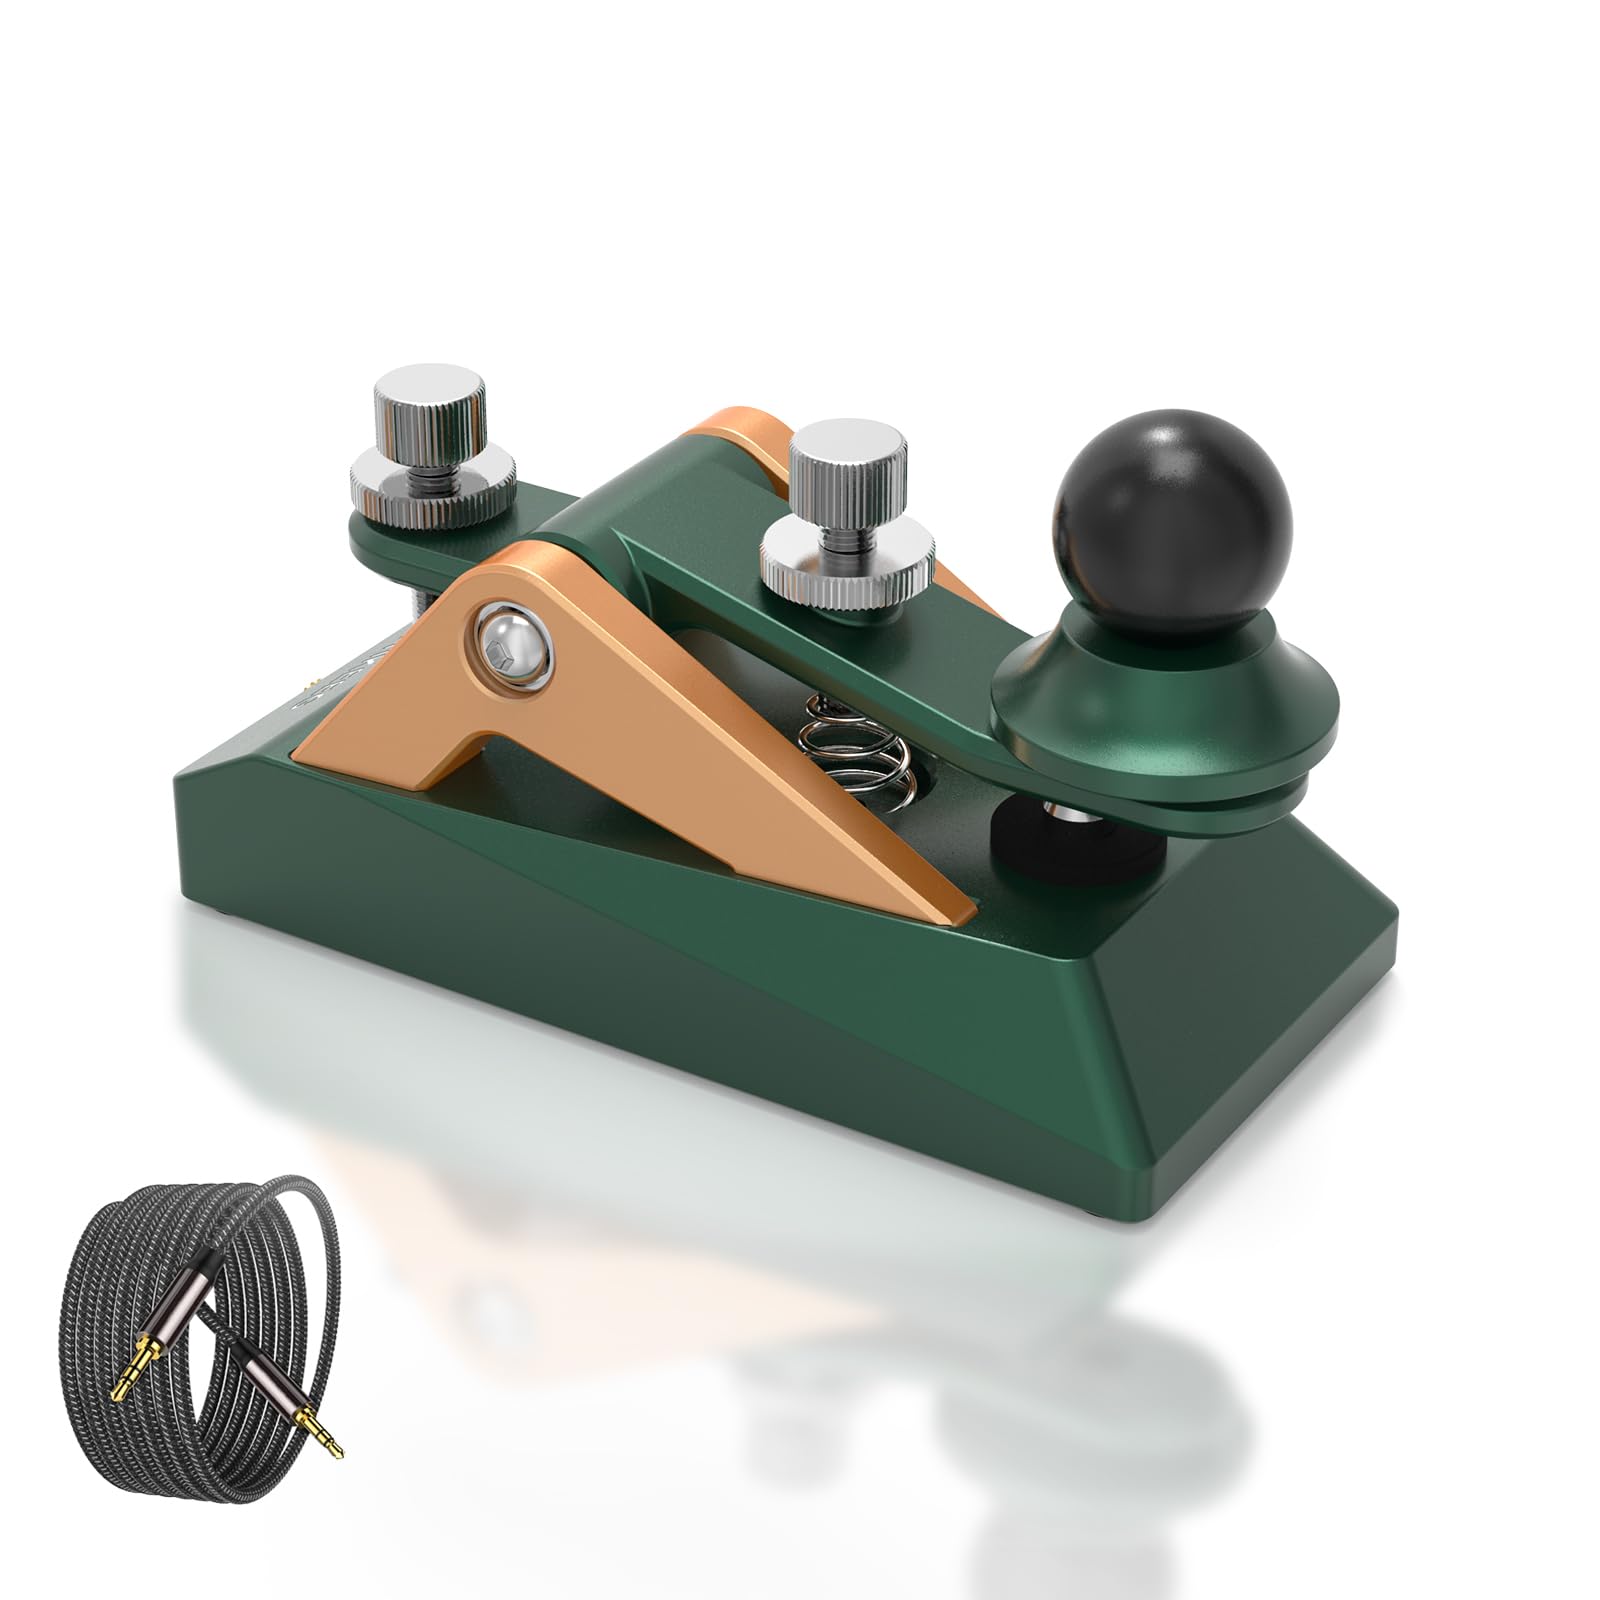 Discover precision with this fully adjustable Morse code key. Crafted from 6061T6 aluminum alloy, anodized for durability. Ergonomic design ensures comfort during extended use. Solid CNC machined from billet aluminum for reliability. Ideal for radio enthusiasts, beginners, and outdoor activities like POTA, SOTA, LOTA. Compact and portable for easy carrying in any radio setup.